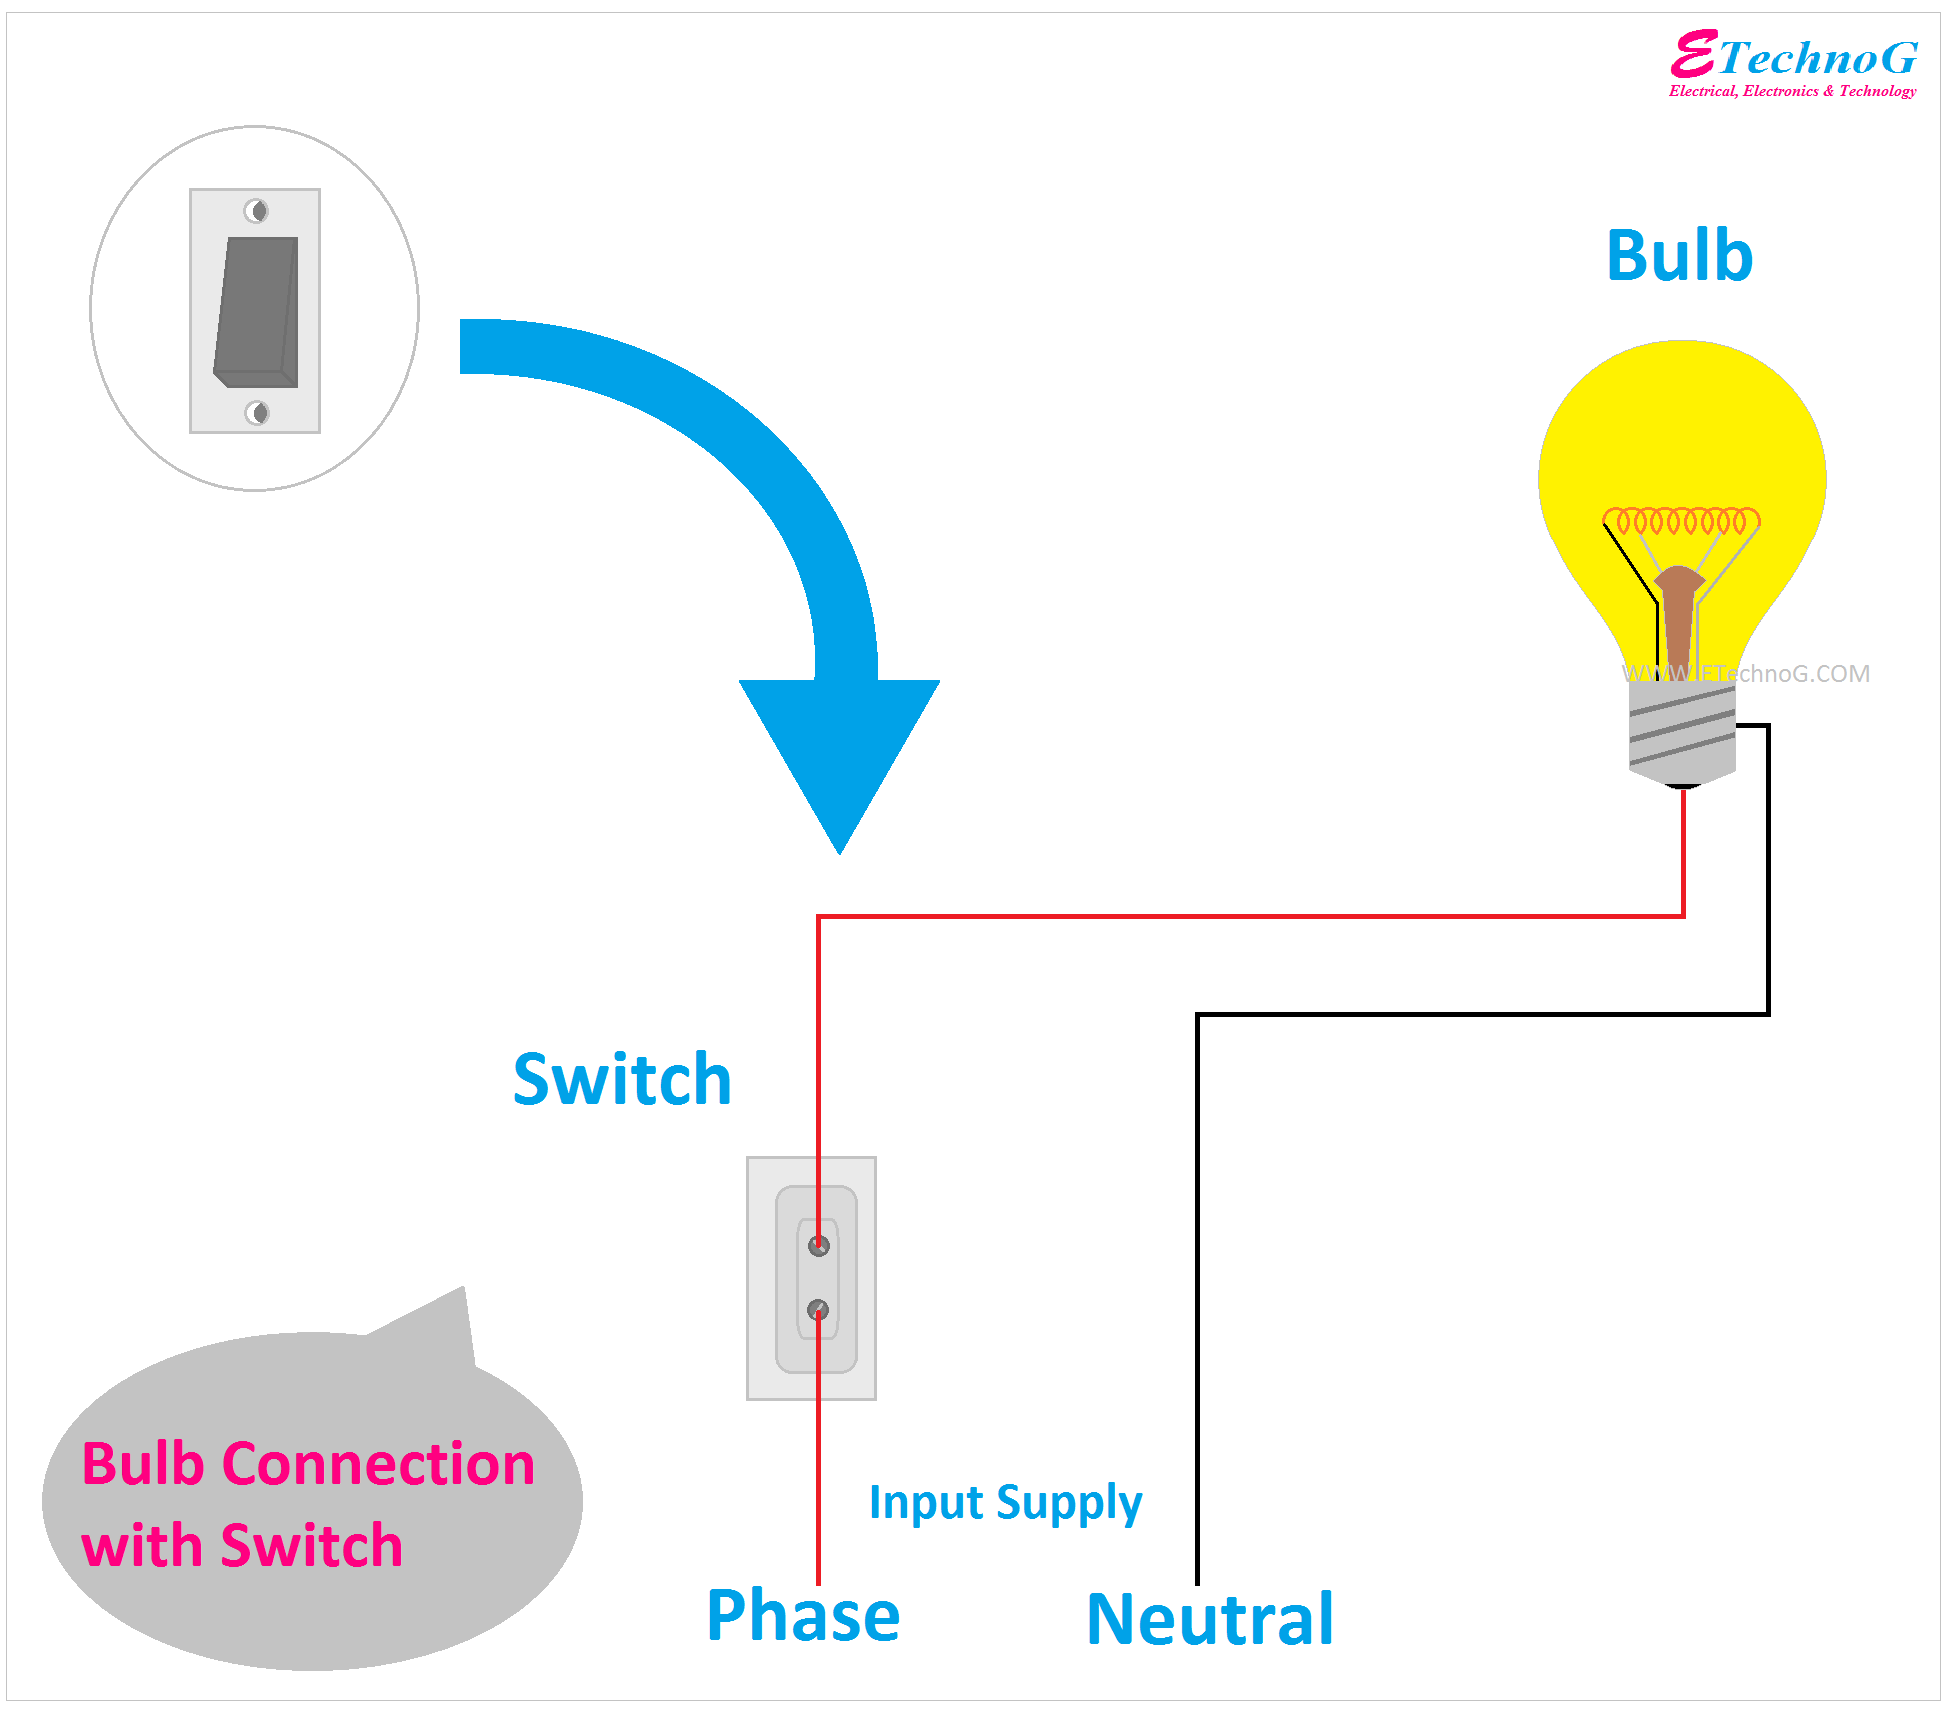 Bulb Connection with Switch, Bulb and Switch Connection